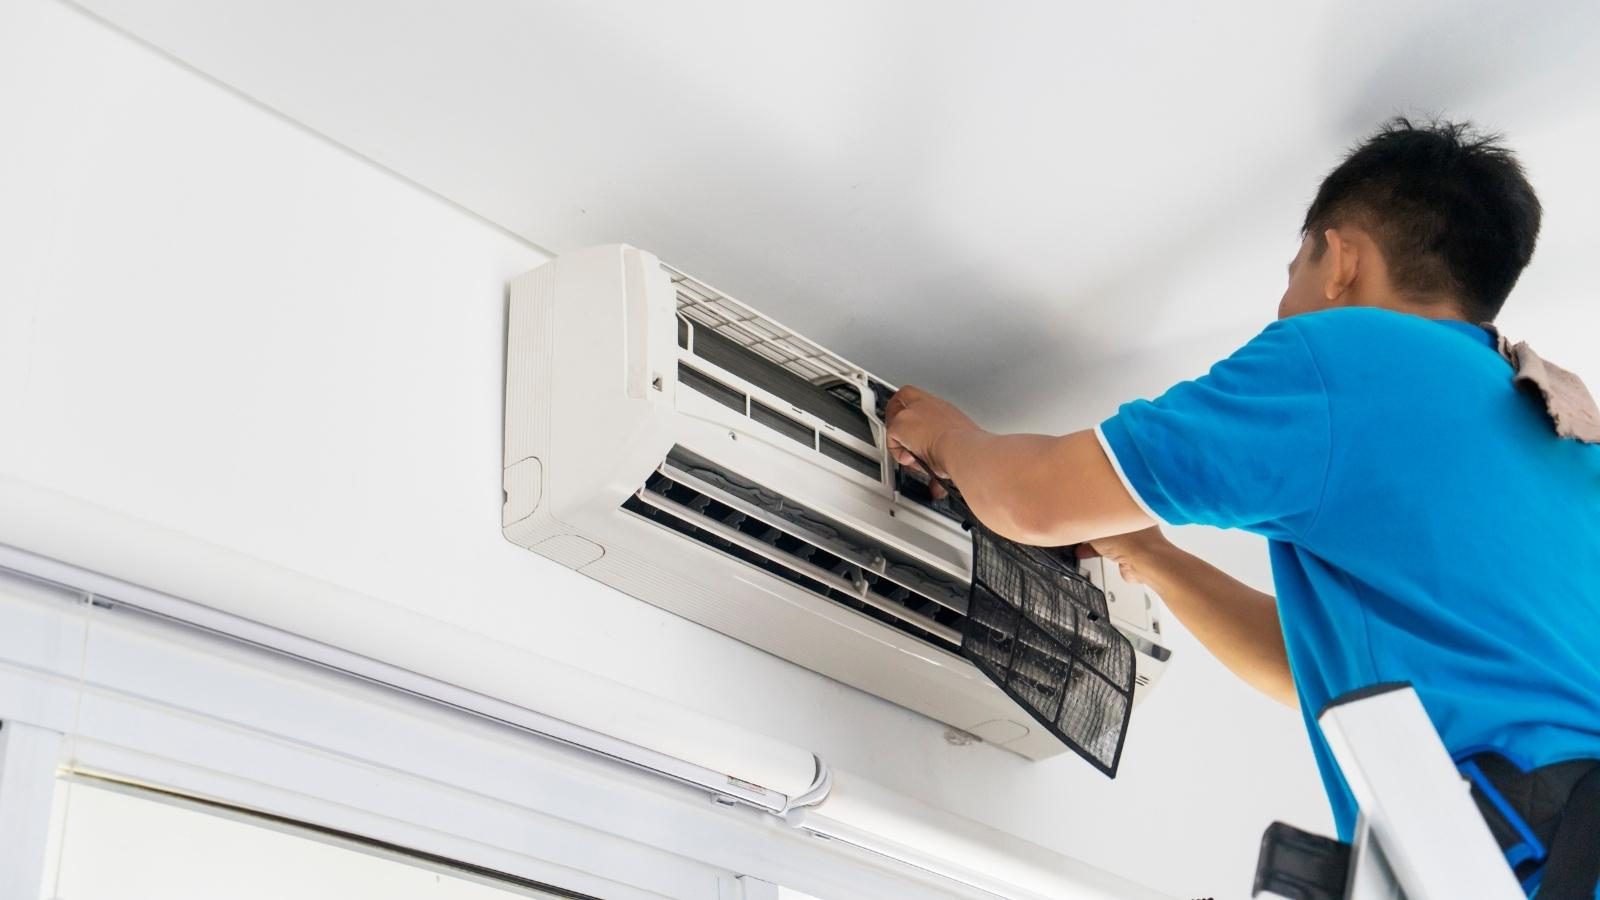 Air conditioning problem - Understanding your dreams - Kaya